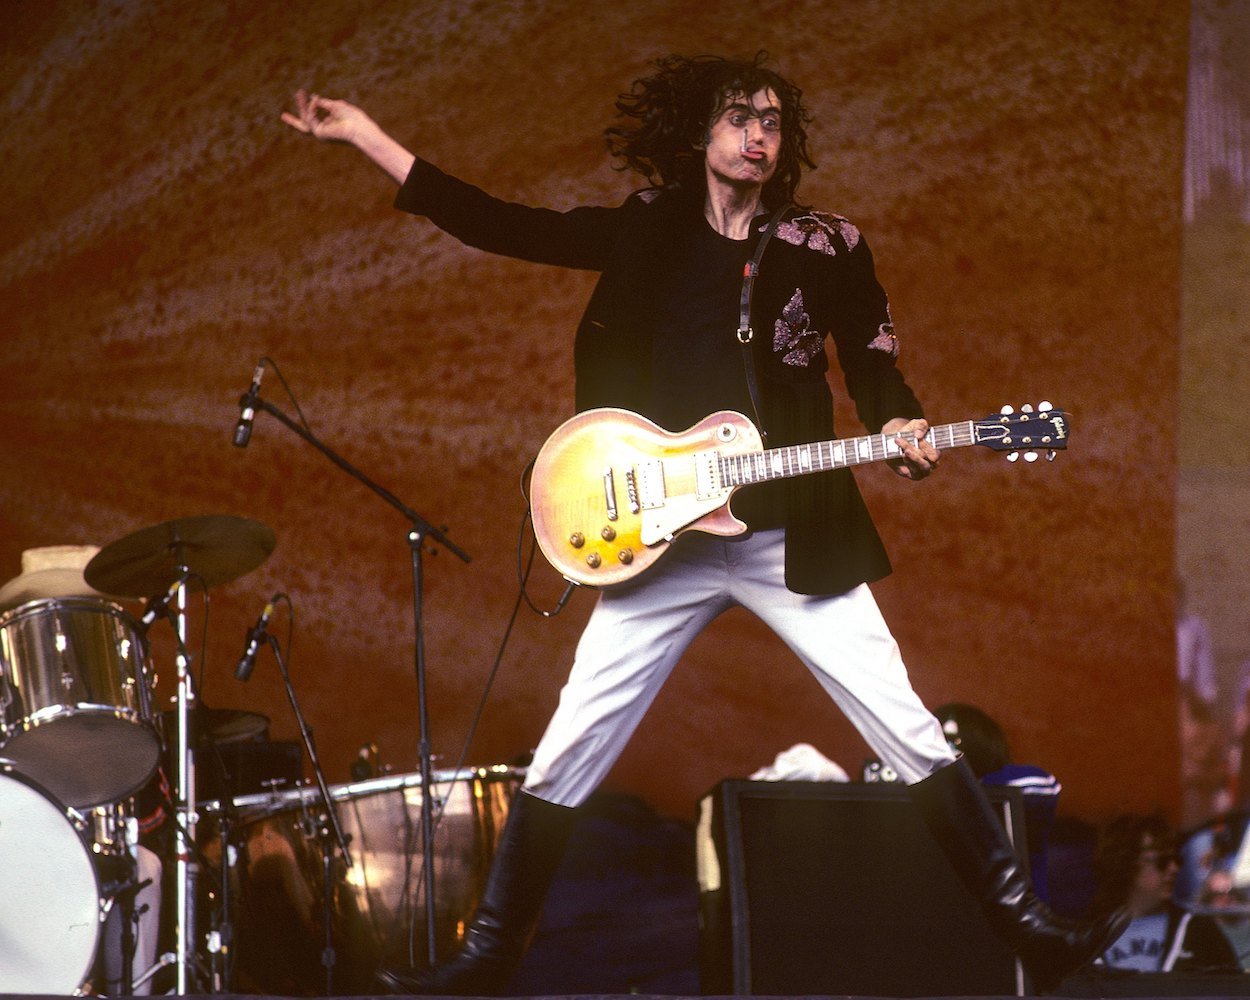 Jimmy Page, who made two big changes before recording 'Led Zeppelin II,' performs with Led Zeppelin around 1970.